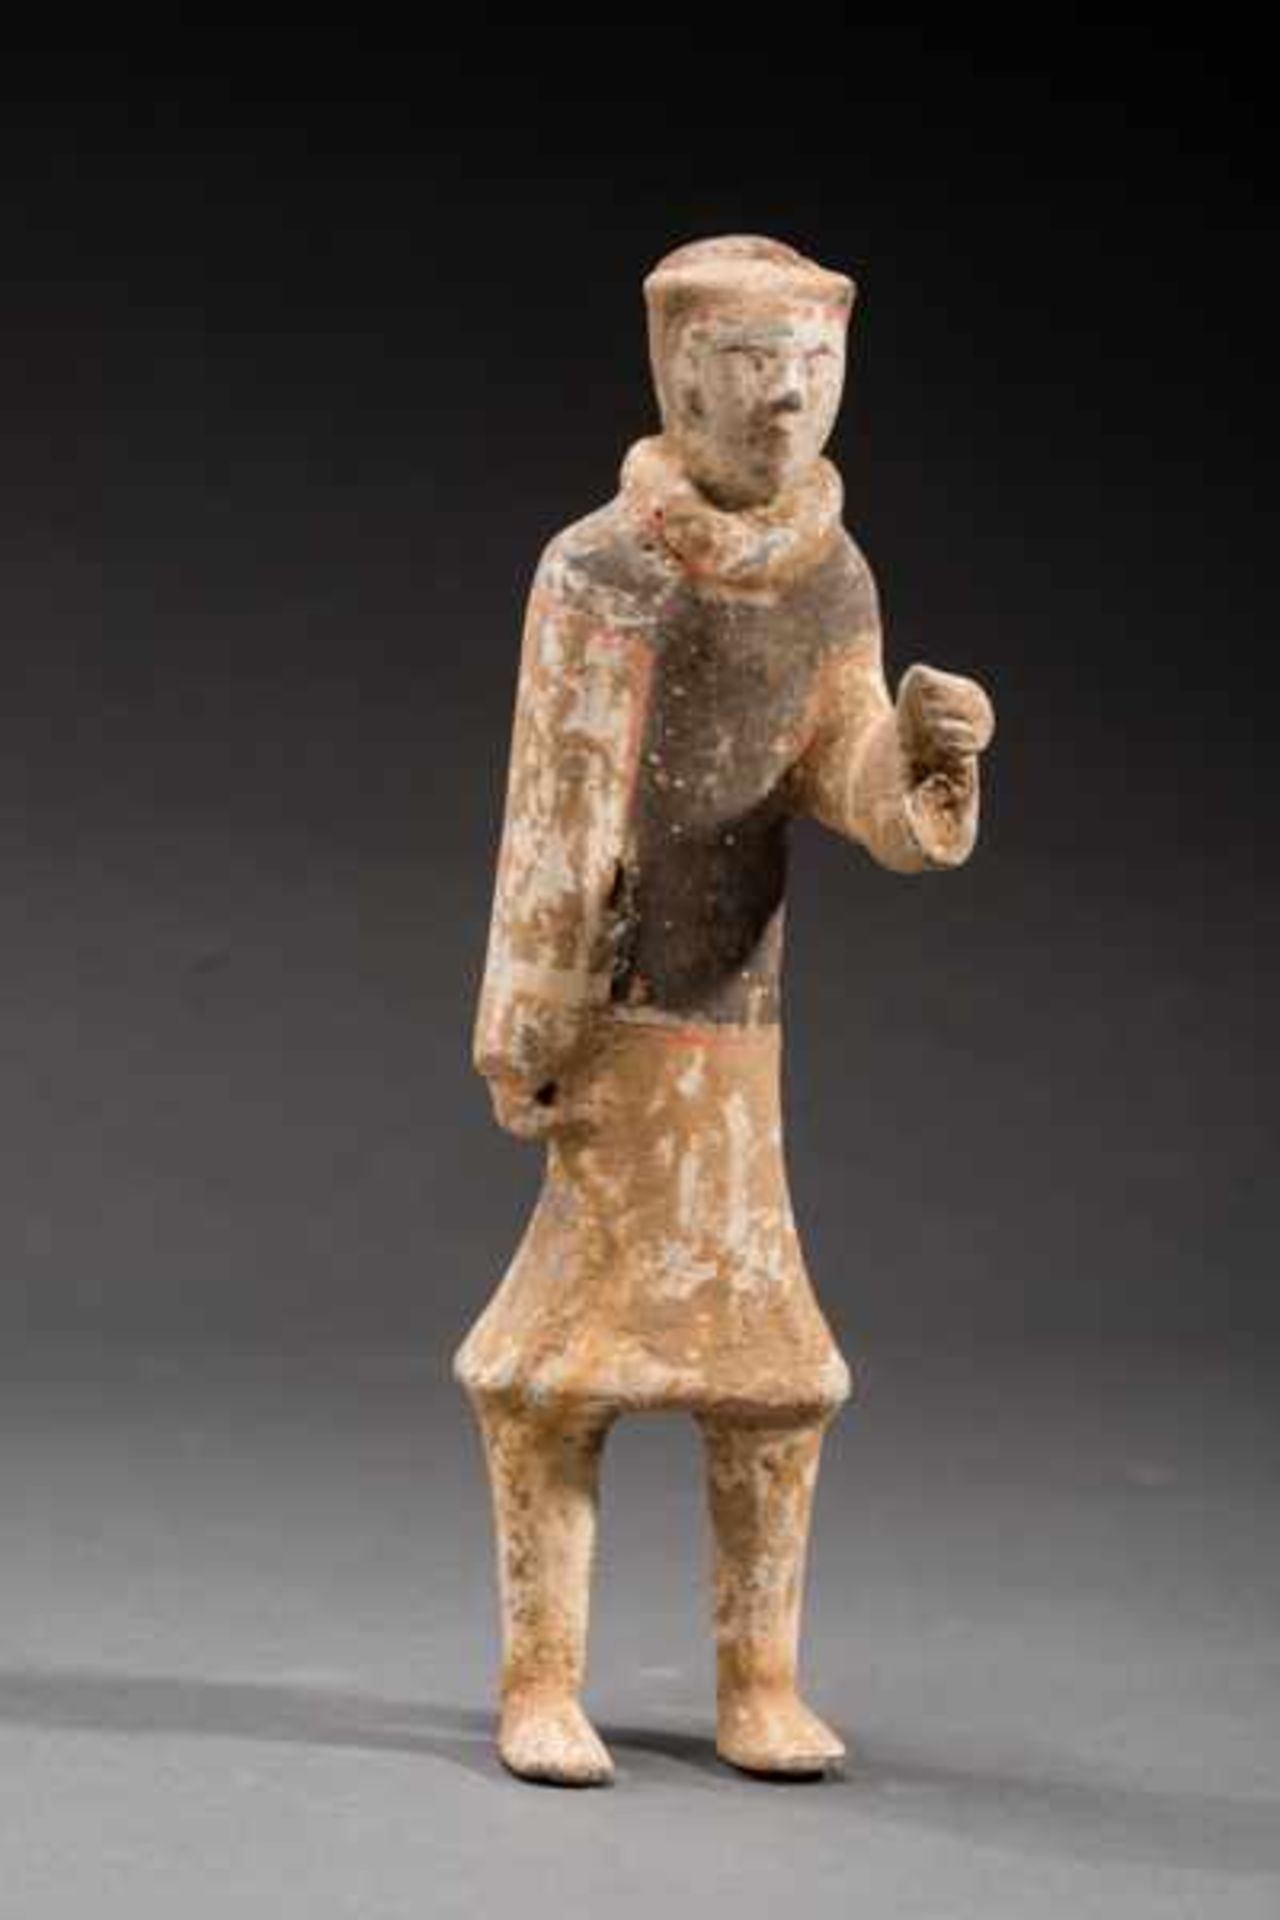 SMALL GUARDSMAN Terracotta with remnants of originalpainting. China, Early Western Handynasty (3rd - Image 3 of 3